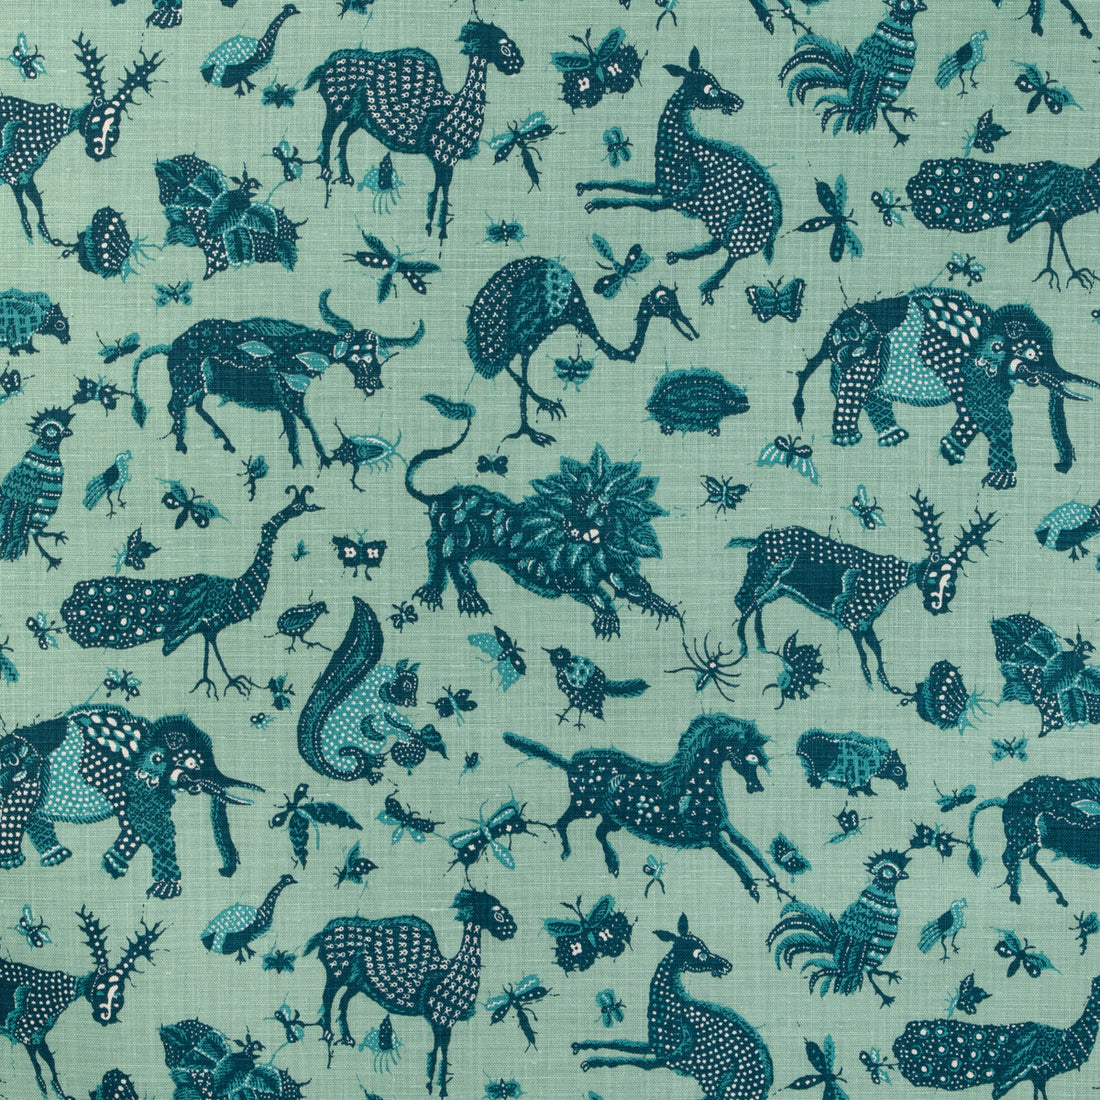 Java Jungle Linen fabric in teal color - pattern 2023127.355.0 - by Lee Jofa in the Lee Jofa 200 collection